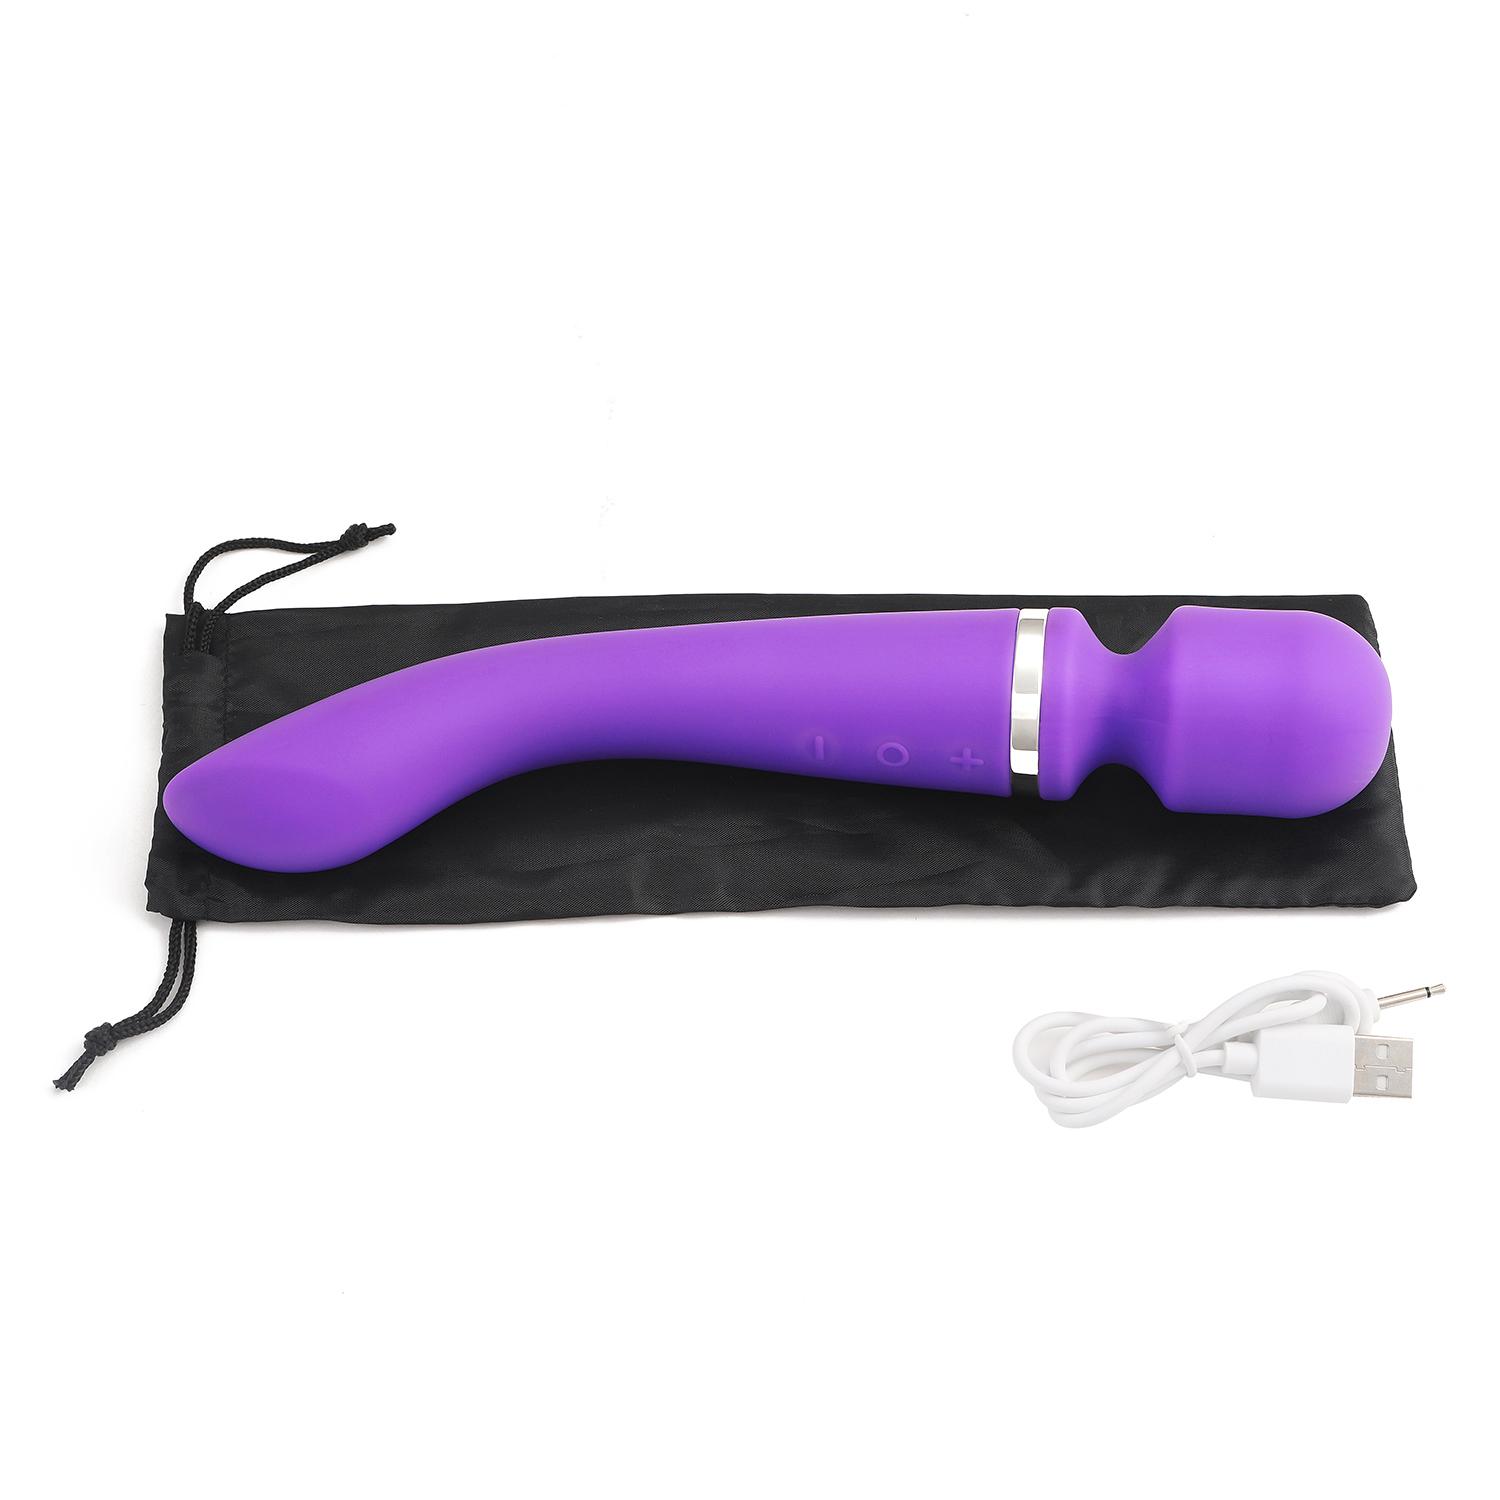  New Arrival Reliable Quality Electric Thrusting Dildo Vibrator For Women Anal